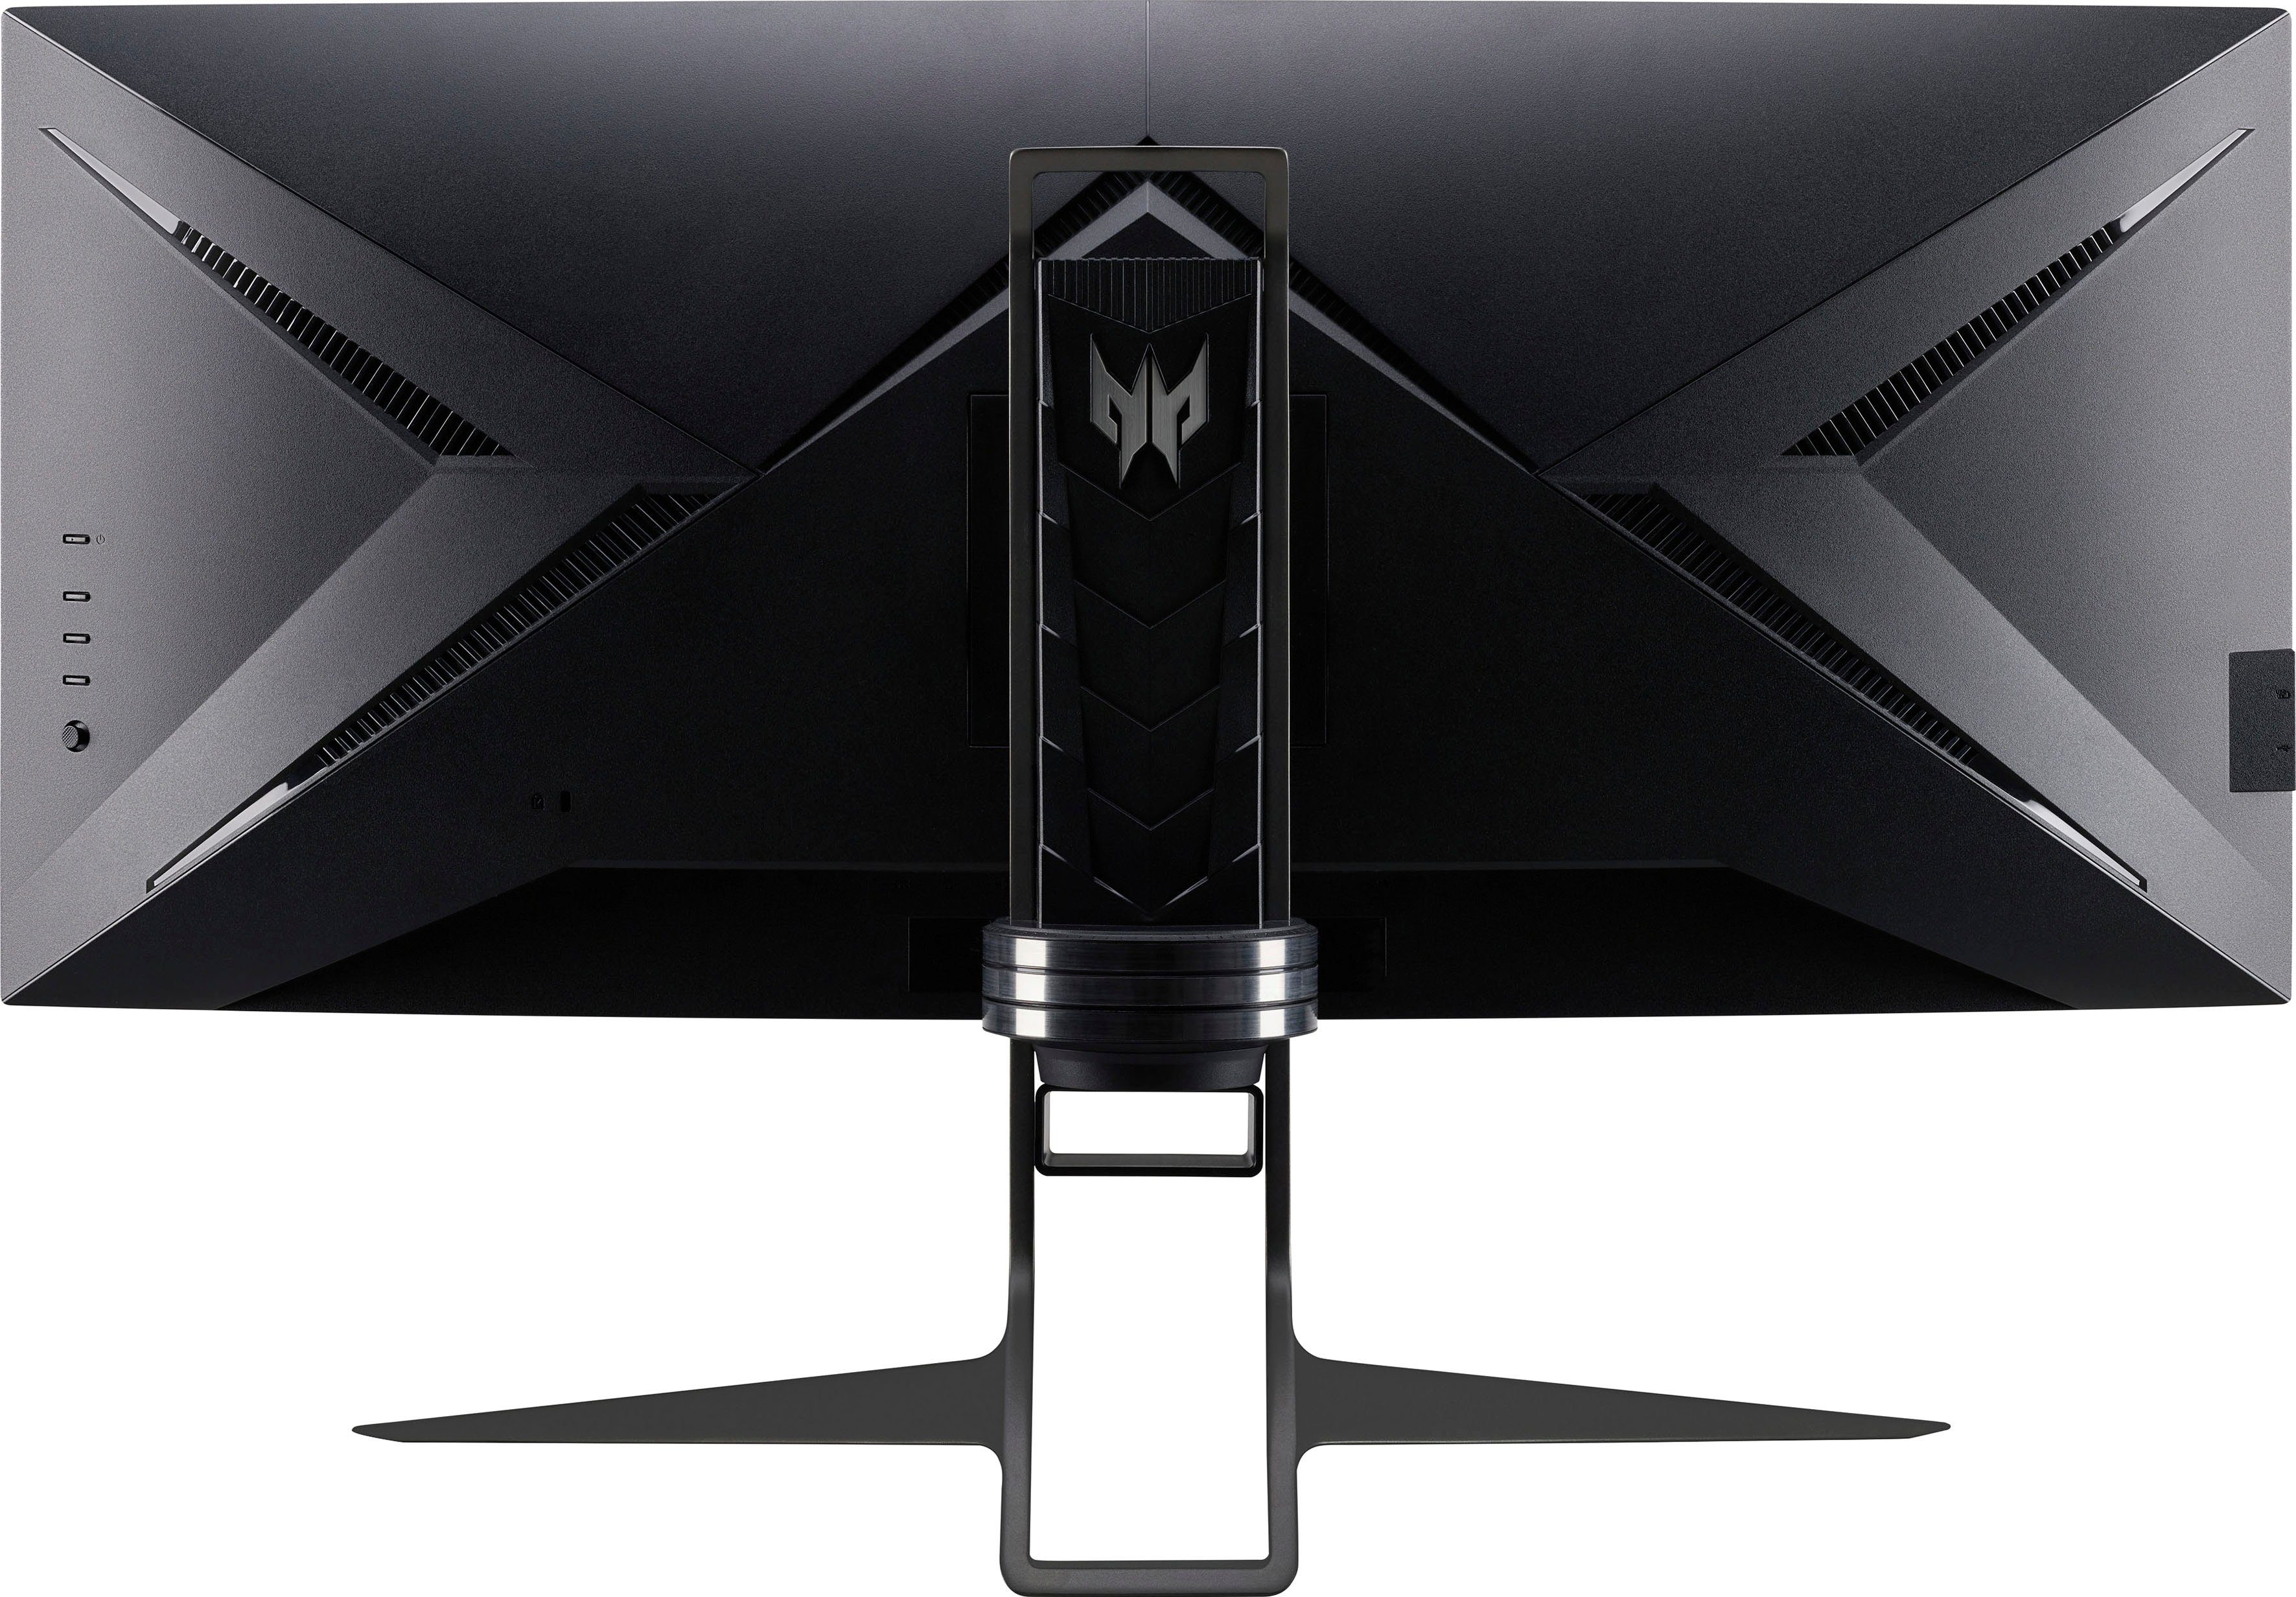 px, (86,4 IPS-LED) Hz, 180 Predator x Acer 0,5 ms 1440 X34GS Curved-Gaming-LED-Monitor Reaktionszeit, ", 3440 cm/34